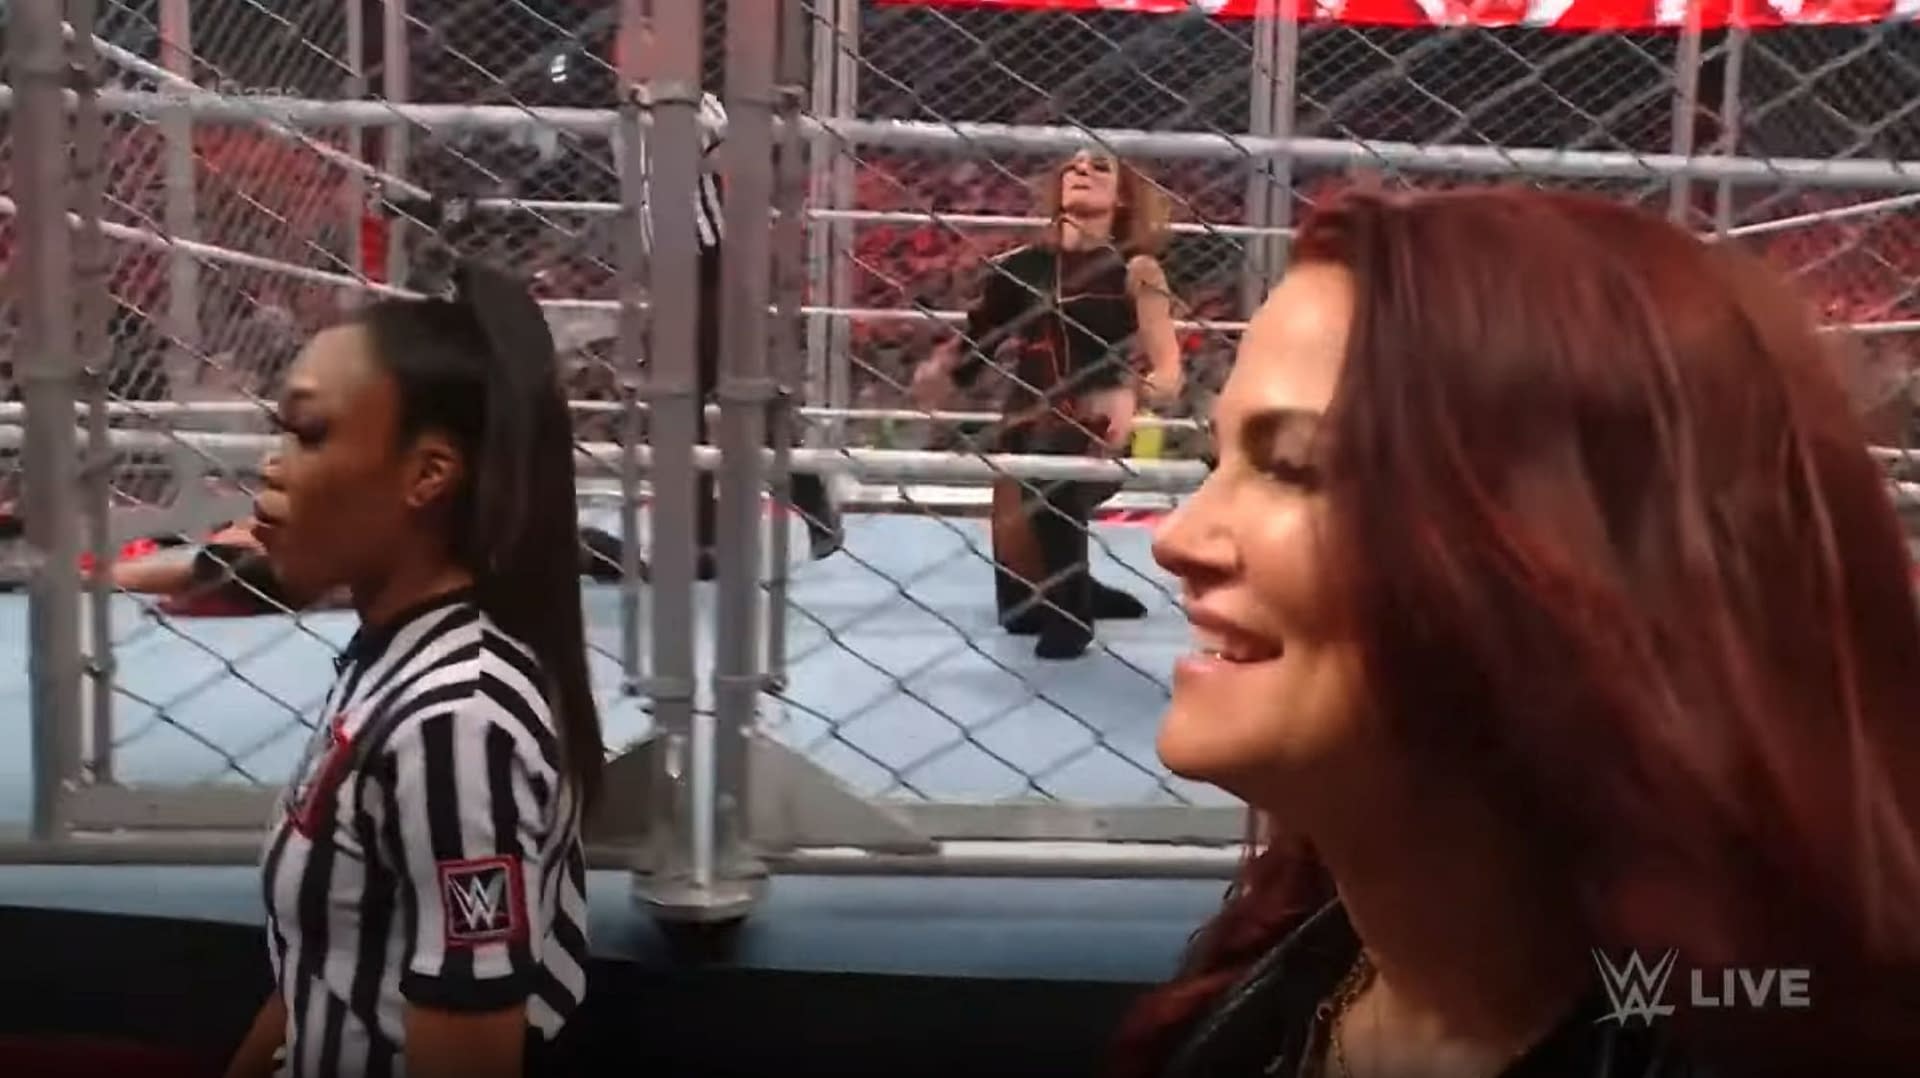 Lita has Becky Lynch's back in Steel Cage Match with Bayley